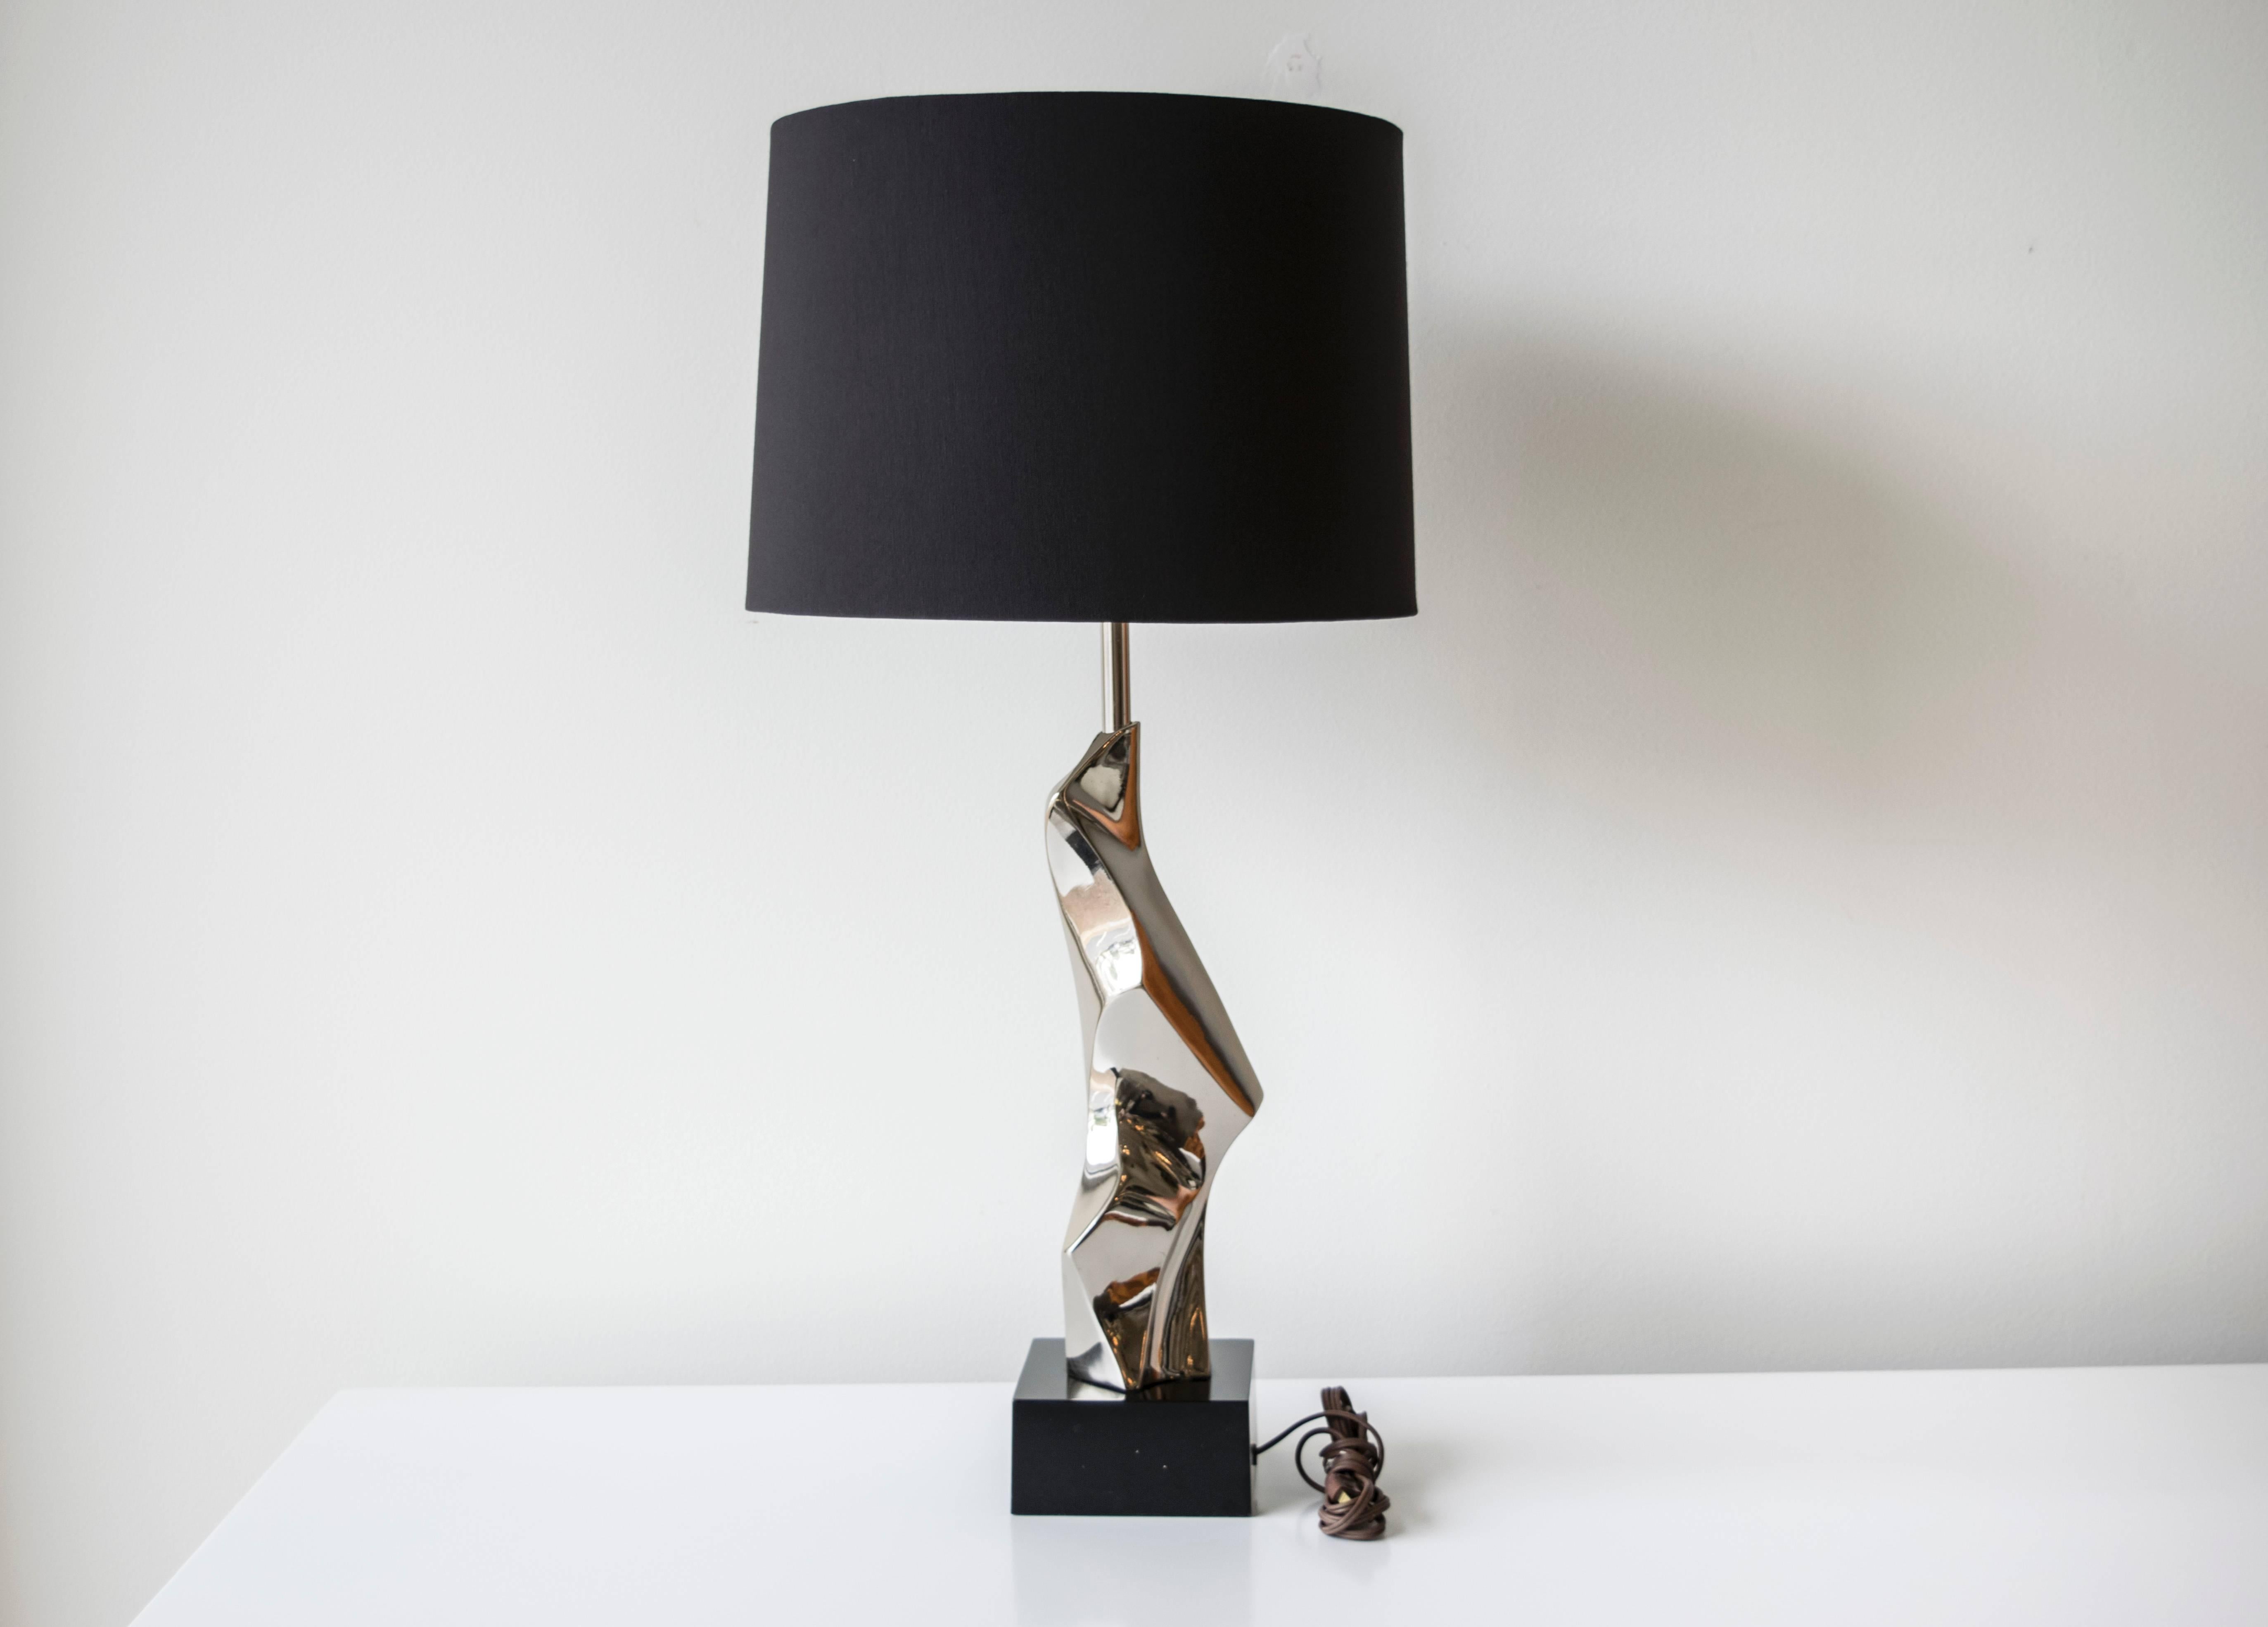 Elegant iconic Brutalist lamp by Maurizio Tempestini on a black lacquered chrome base.